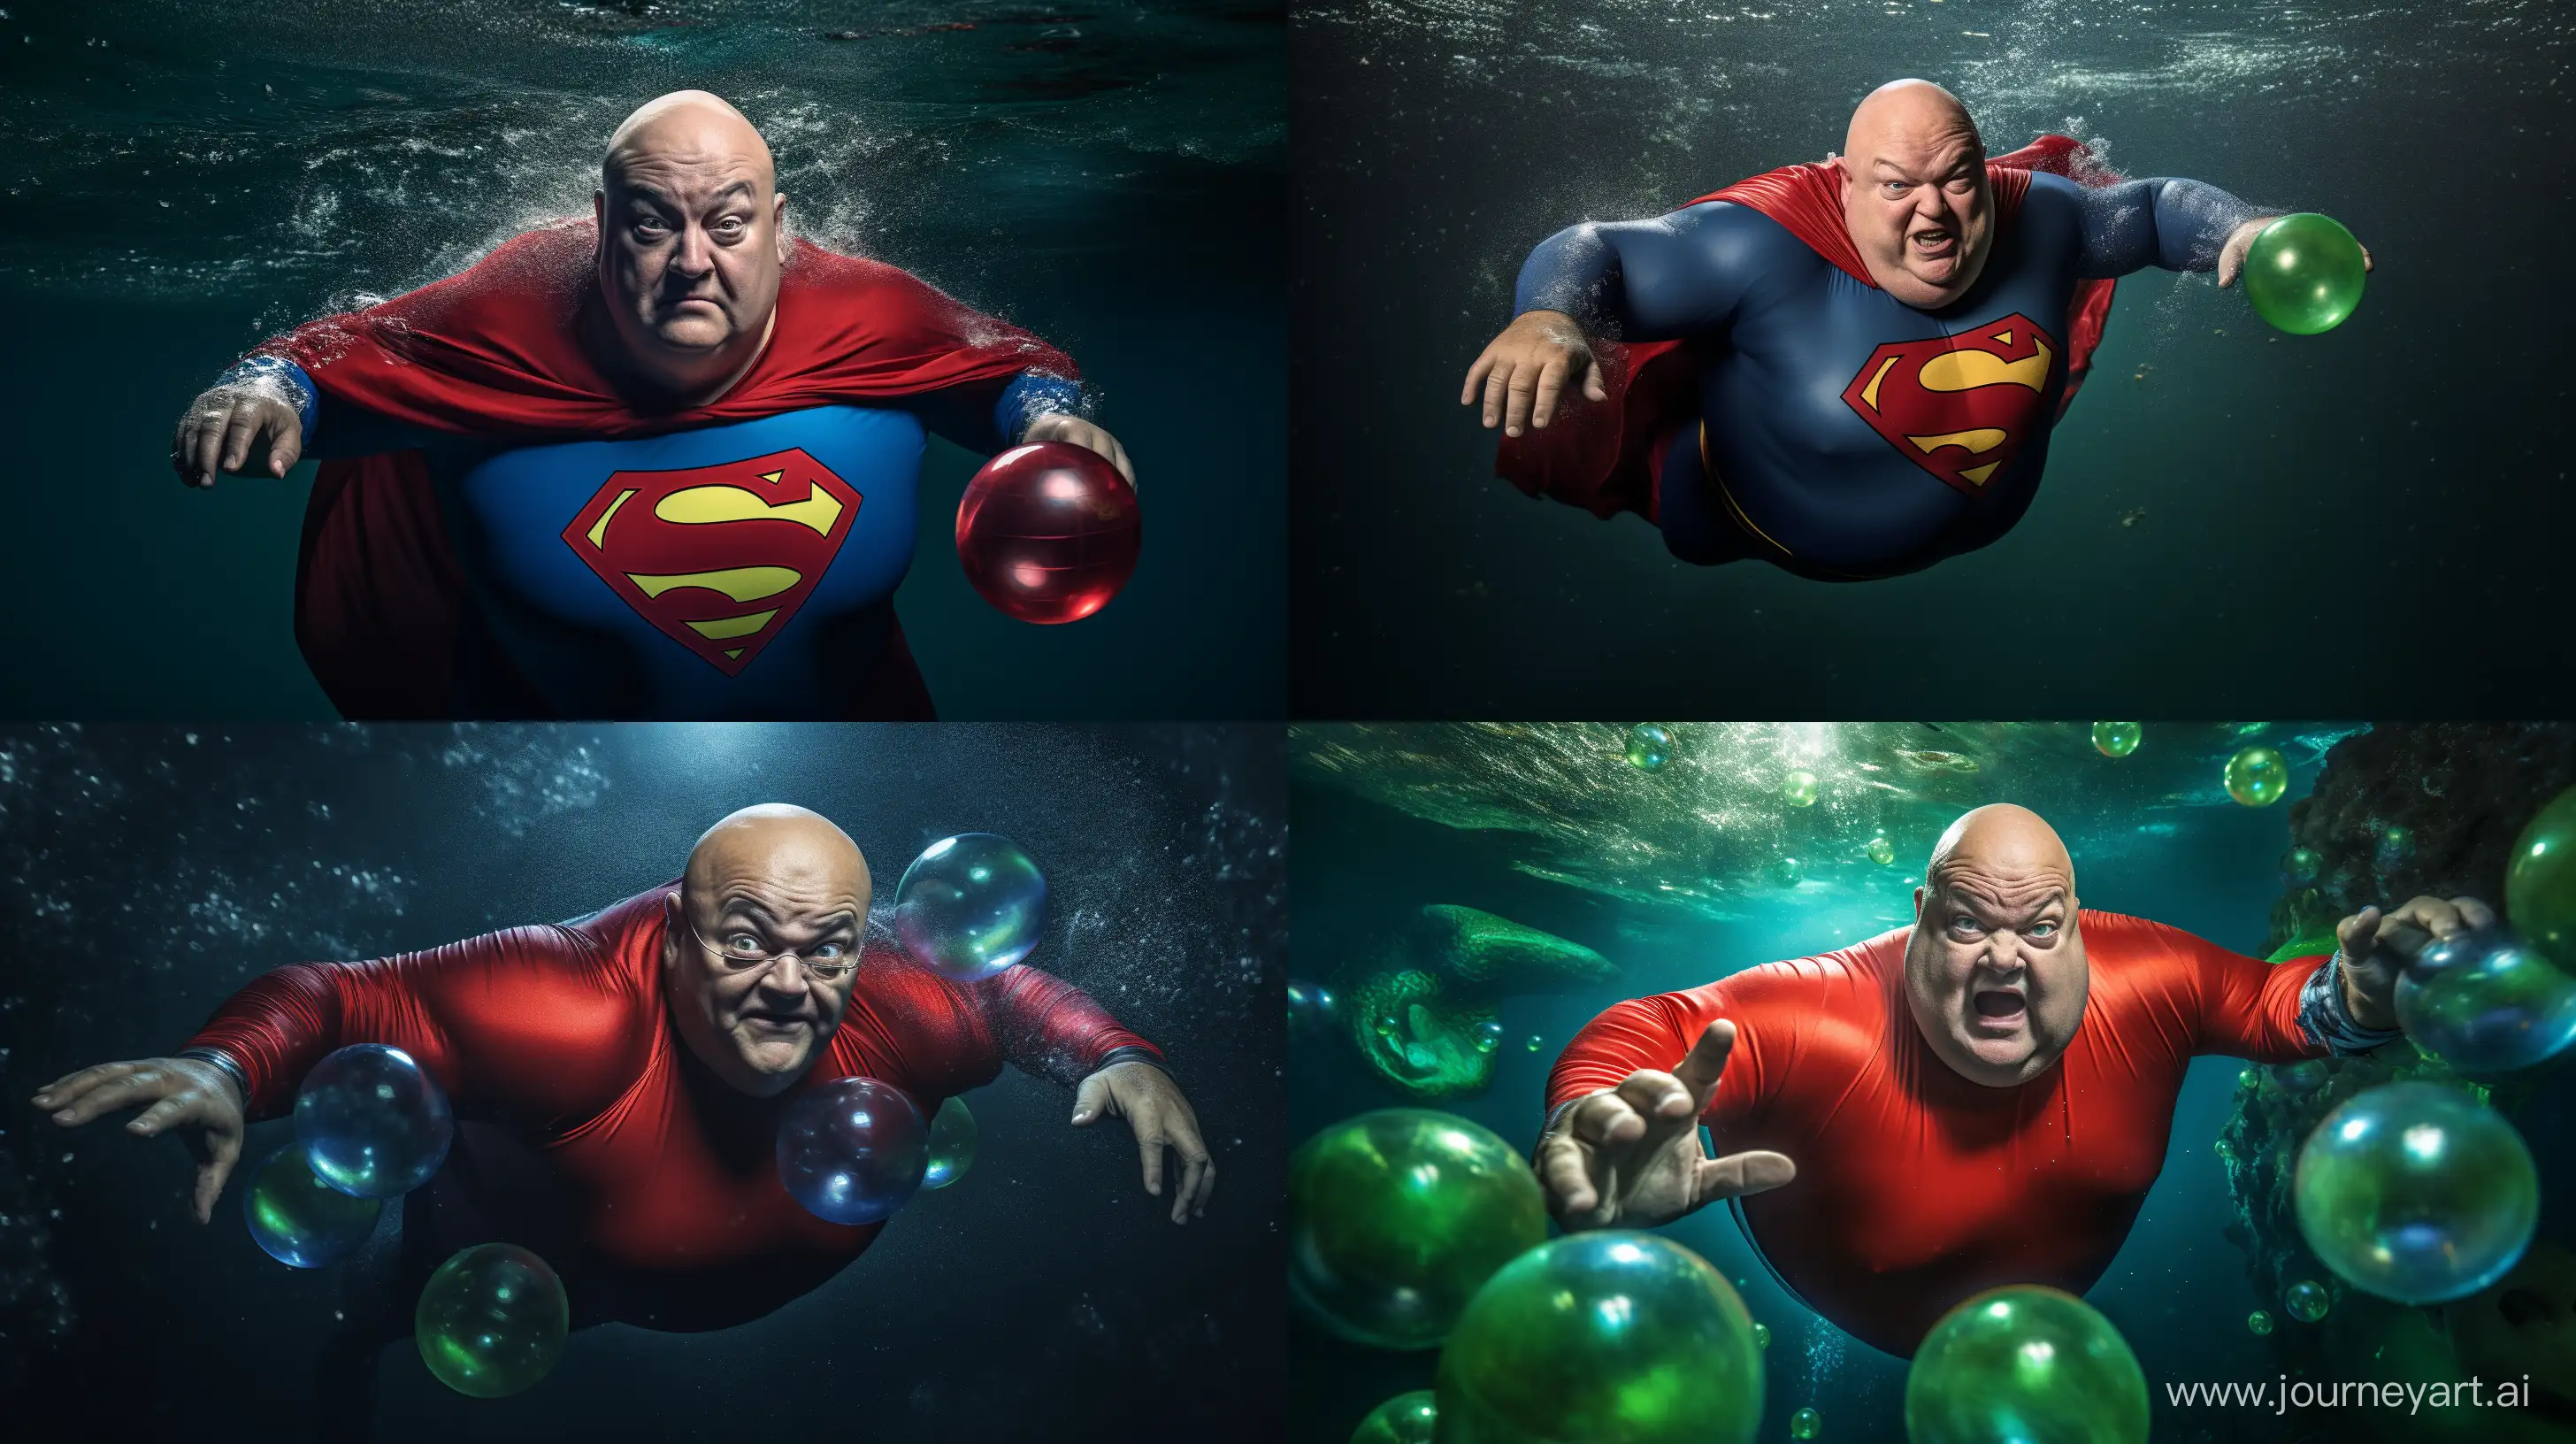 chubby man 70 years old man diving in water, small green illuminated ball, wet tight blue spandex superman costume, red cape, clean shaven, bald, sharp-focus, high-quality, award-winning photograph, Canon EOS 5D Mark IV DSLR, professional lighting setup, Adobe Photoshop --ar 16:9